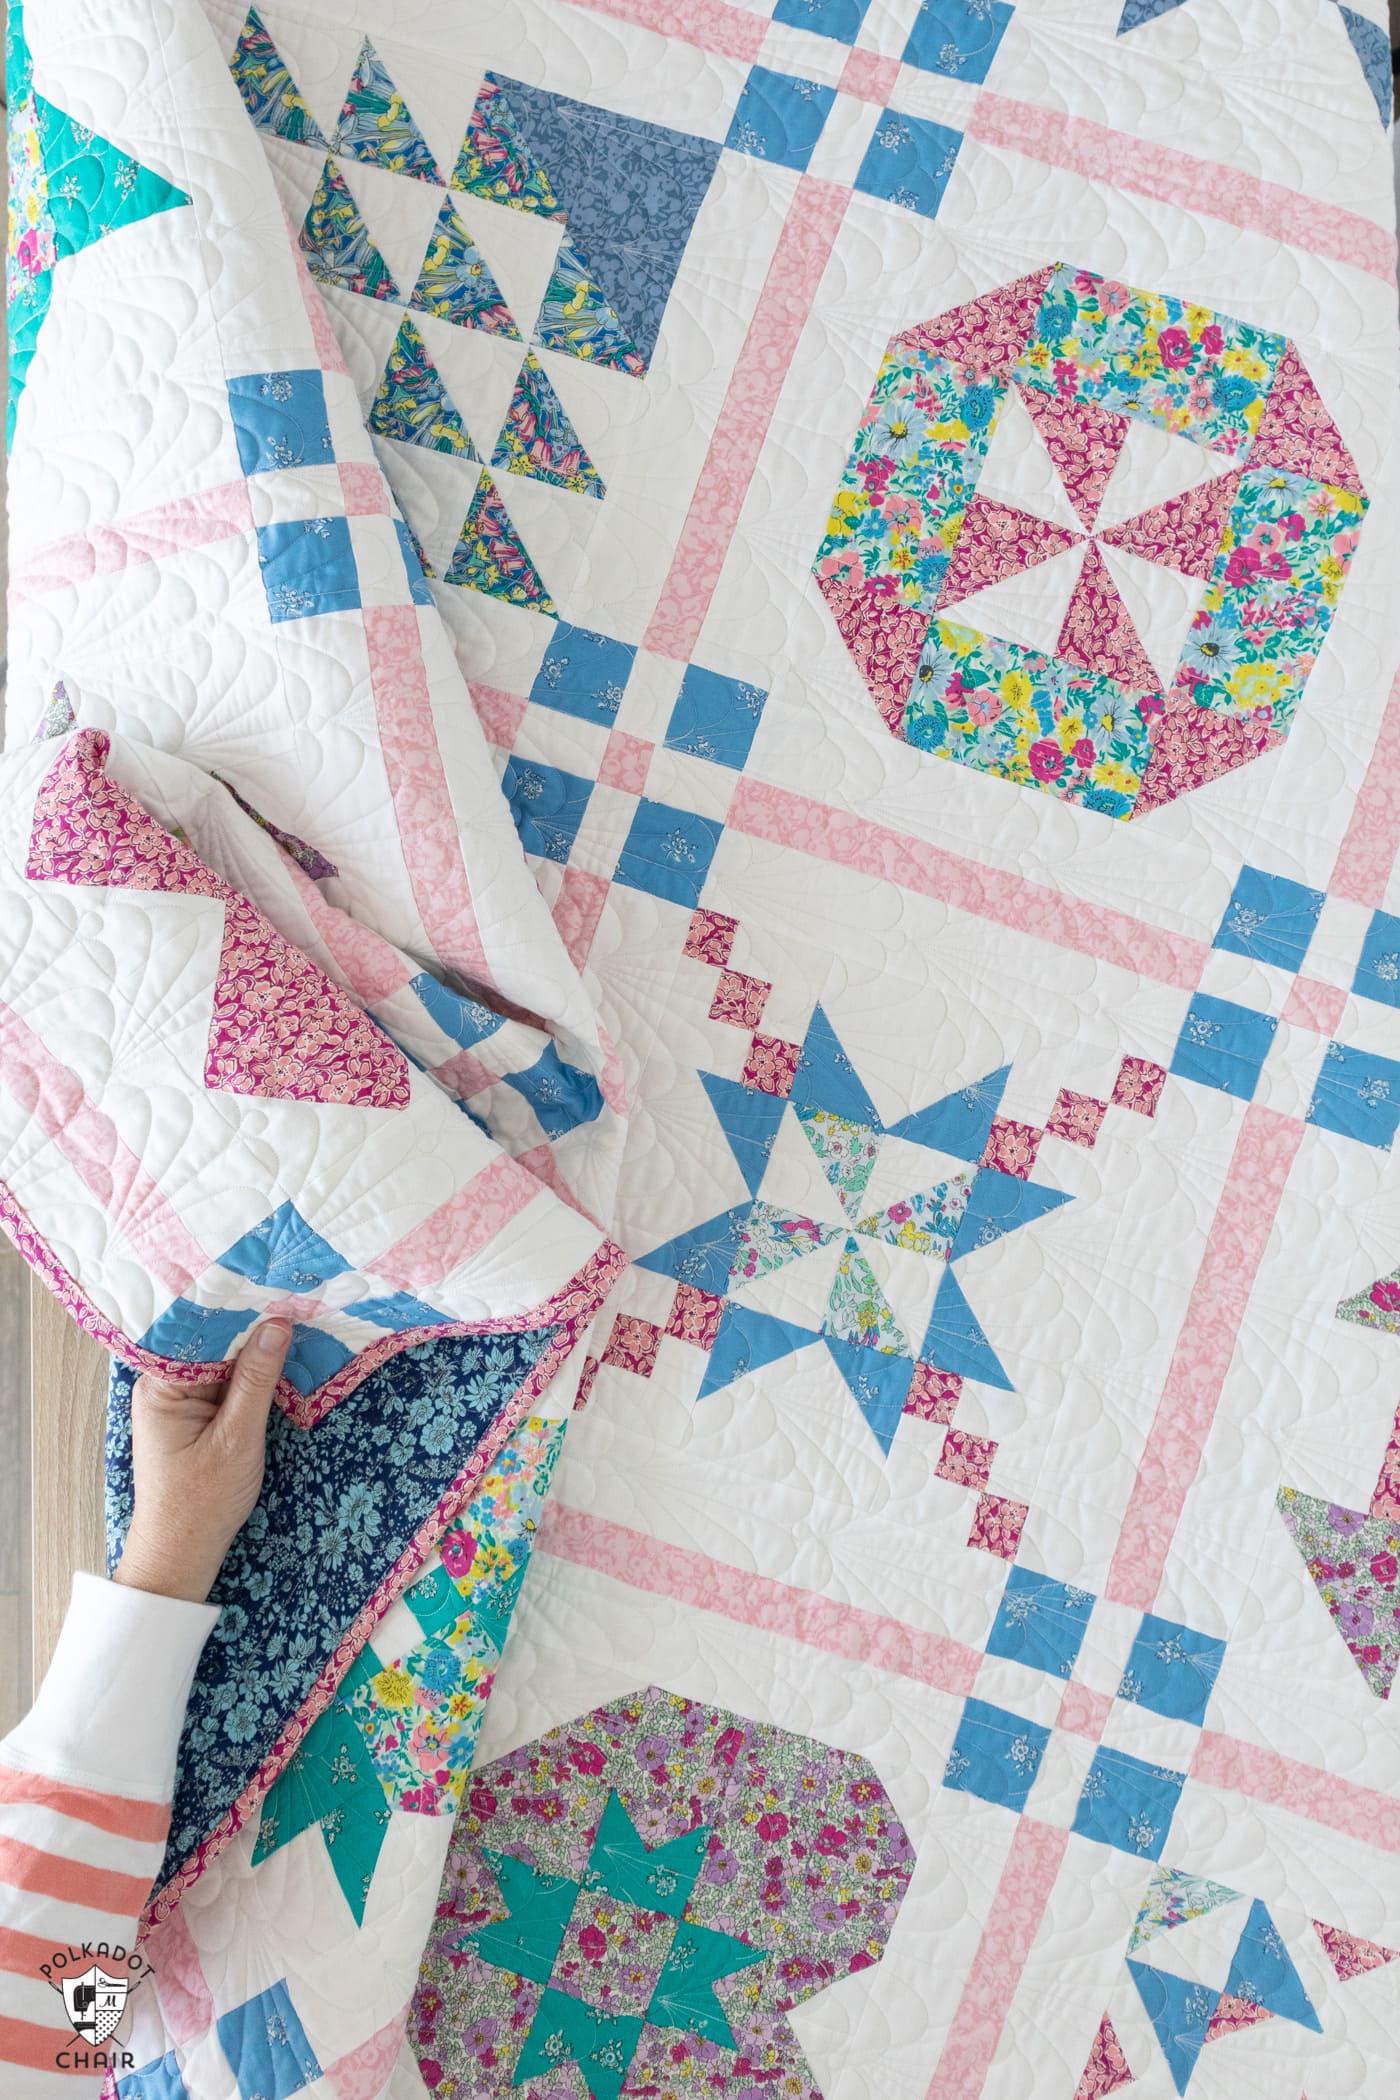 hand holding finished blue, pink and white quilt